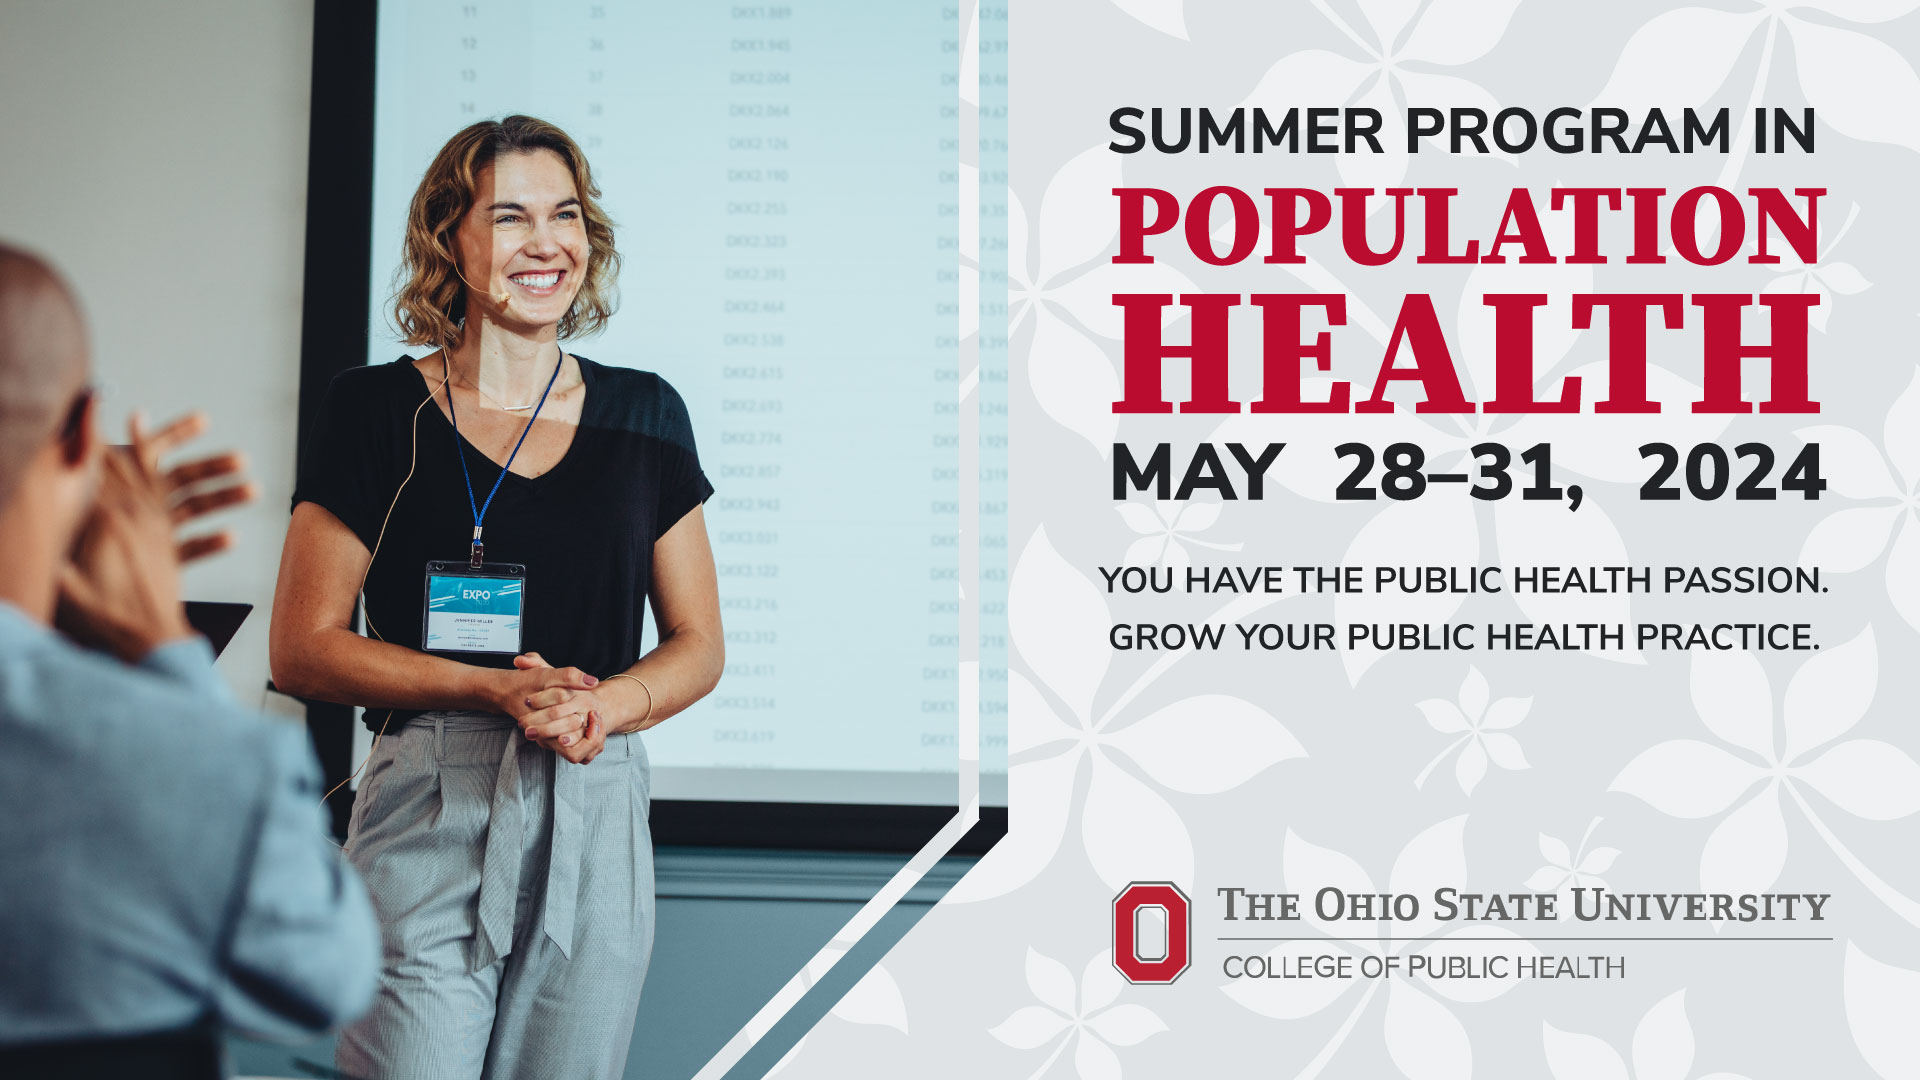 Graphic with a woman at a conference giving a presentation. Text on graphic says "Summer Program in Population Health, May 28-31, 2024. You have the public health passion. Grow your public health practice."